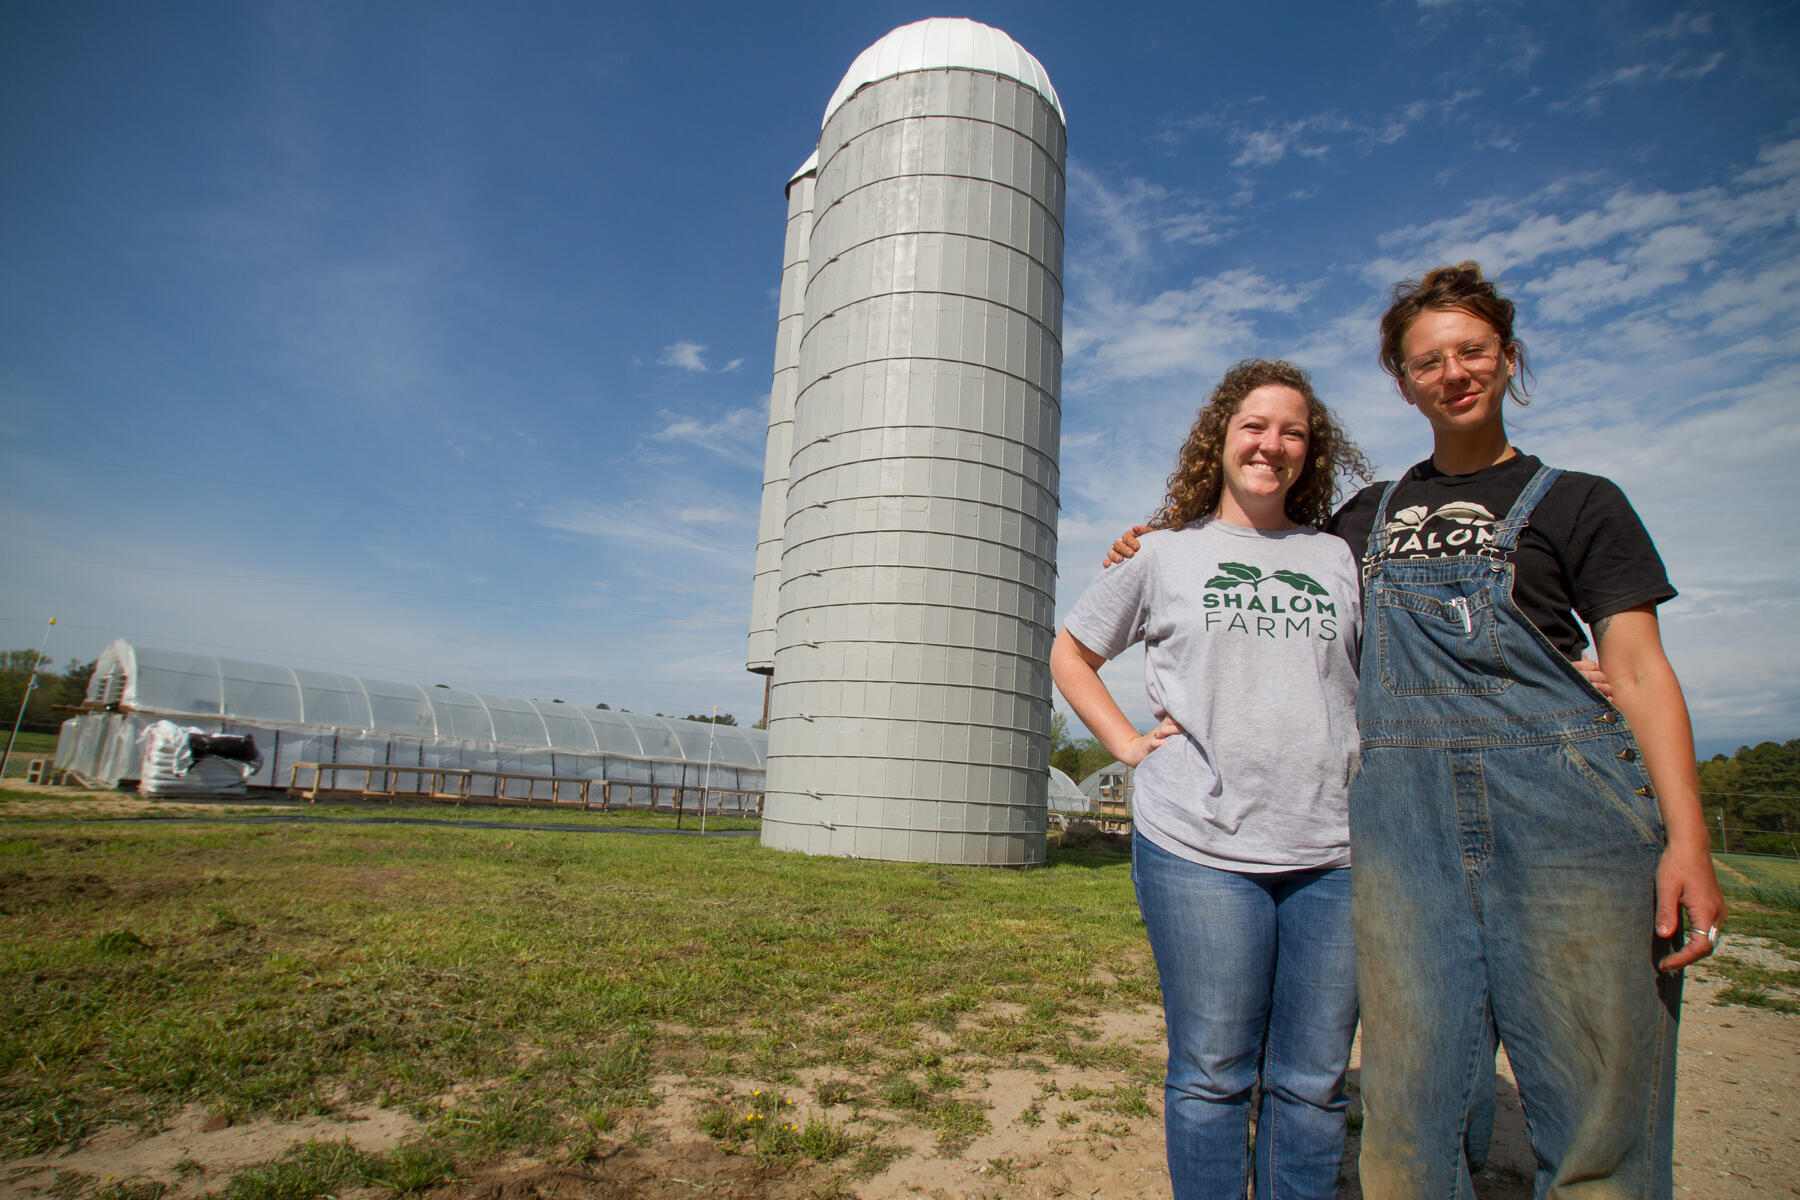 Adams (left) and Burke by Shalom Farms' silo.